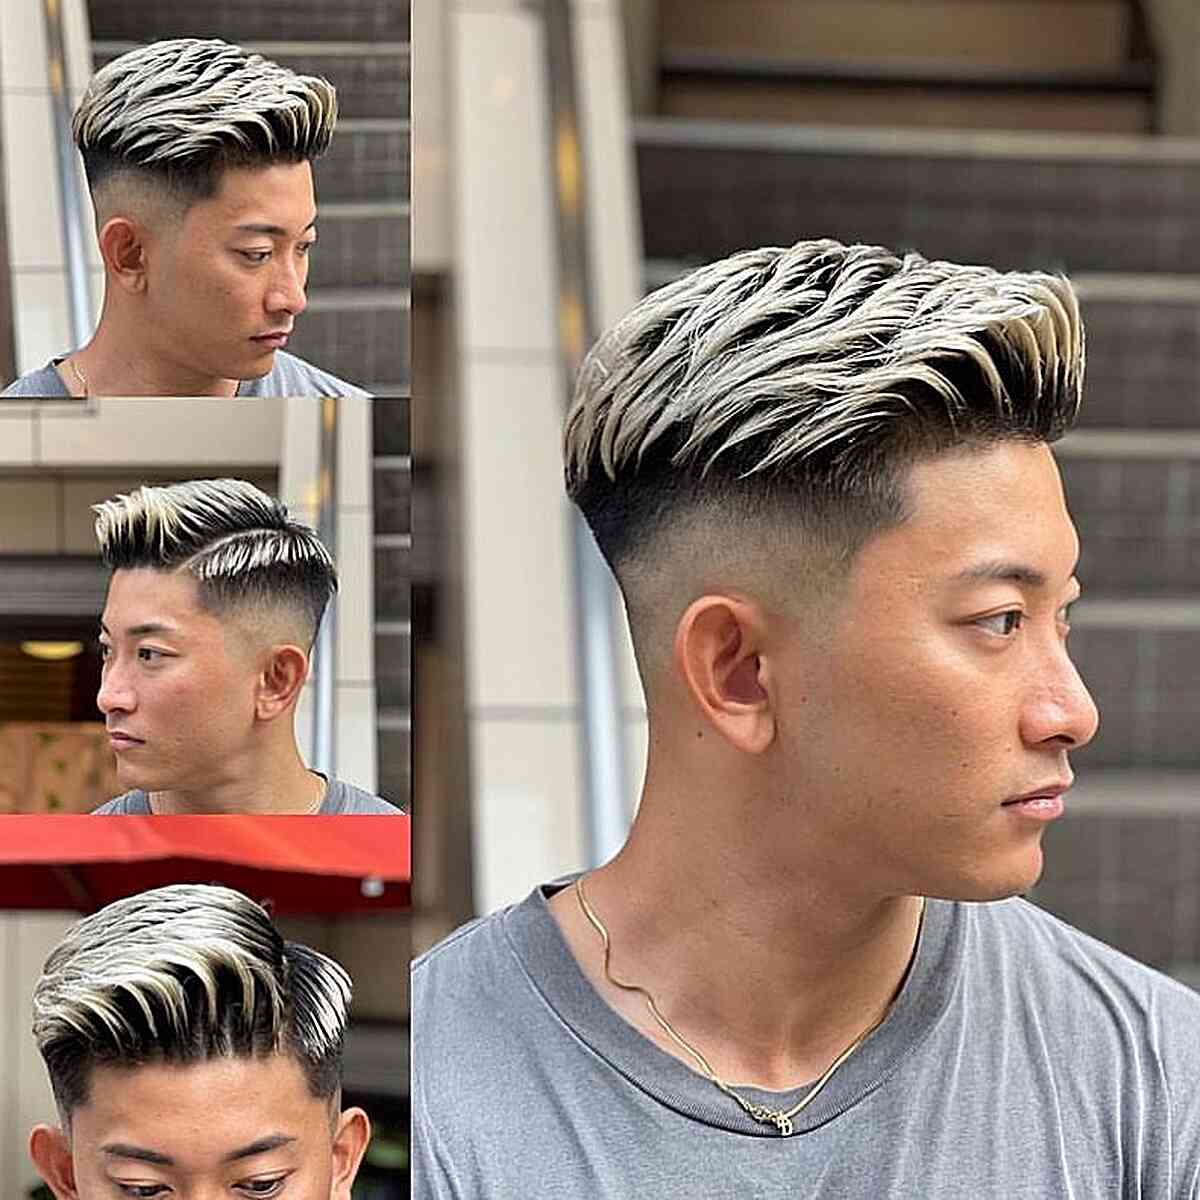 Manly Urban Blonde Tips to Skin Fade for Men with Mid-Length Hair